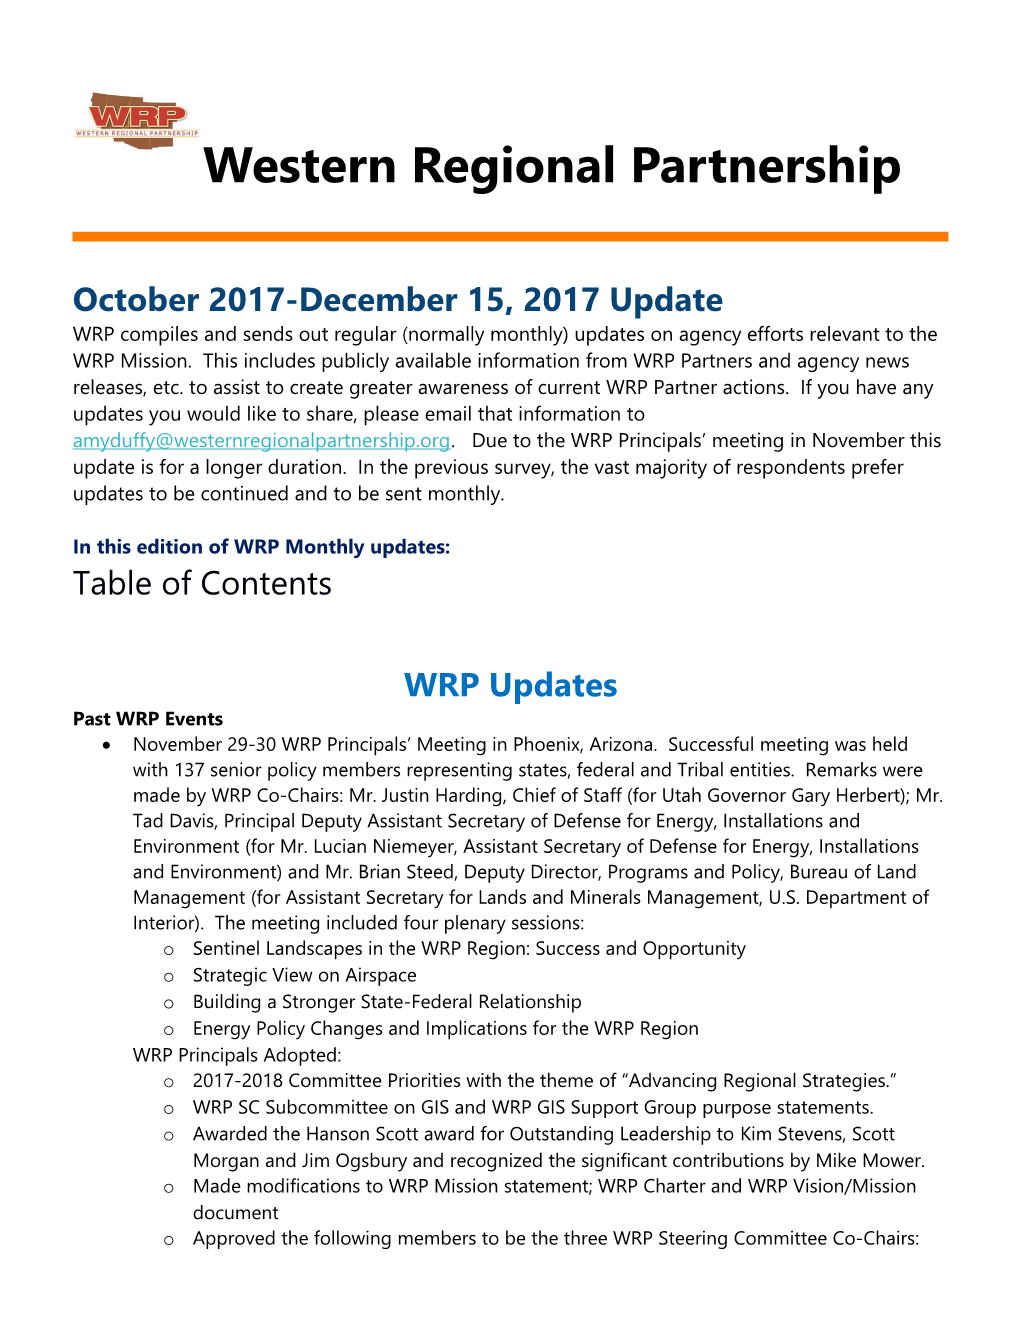 In This Edition of WRP Monthly Updates